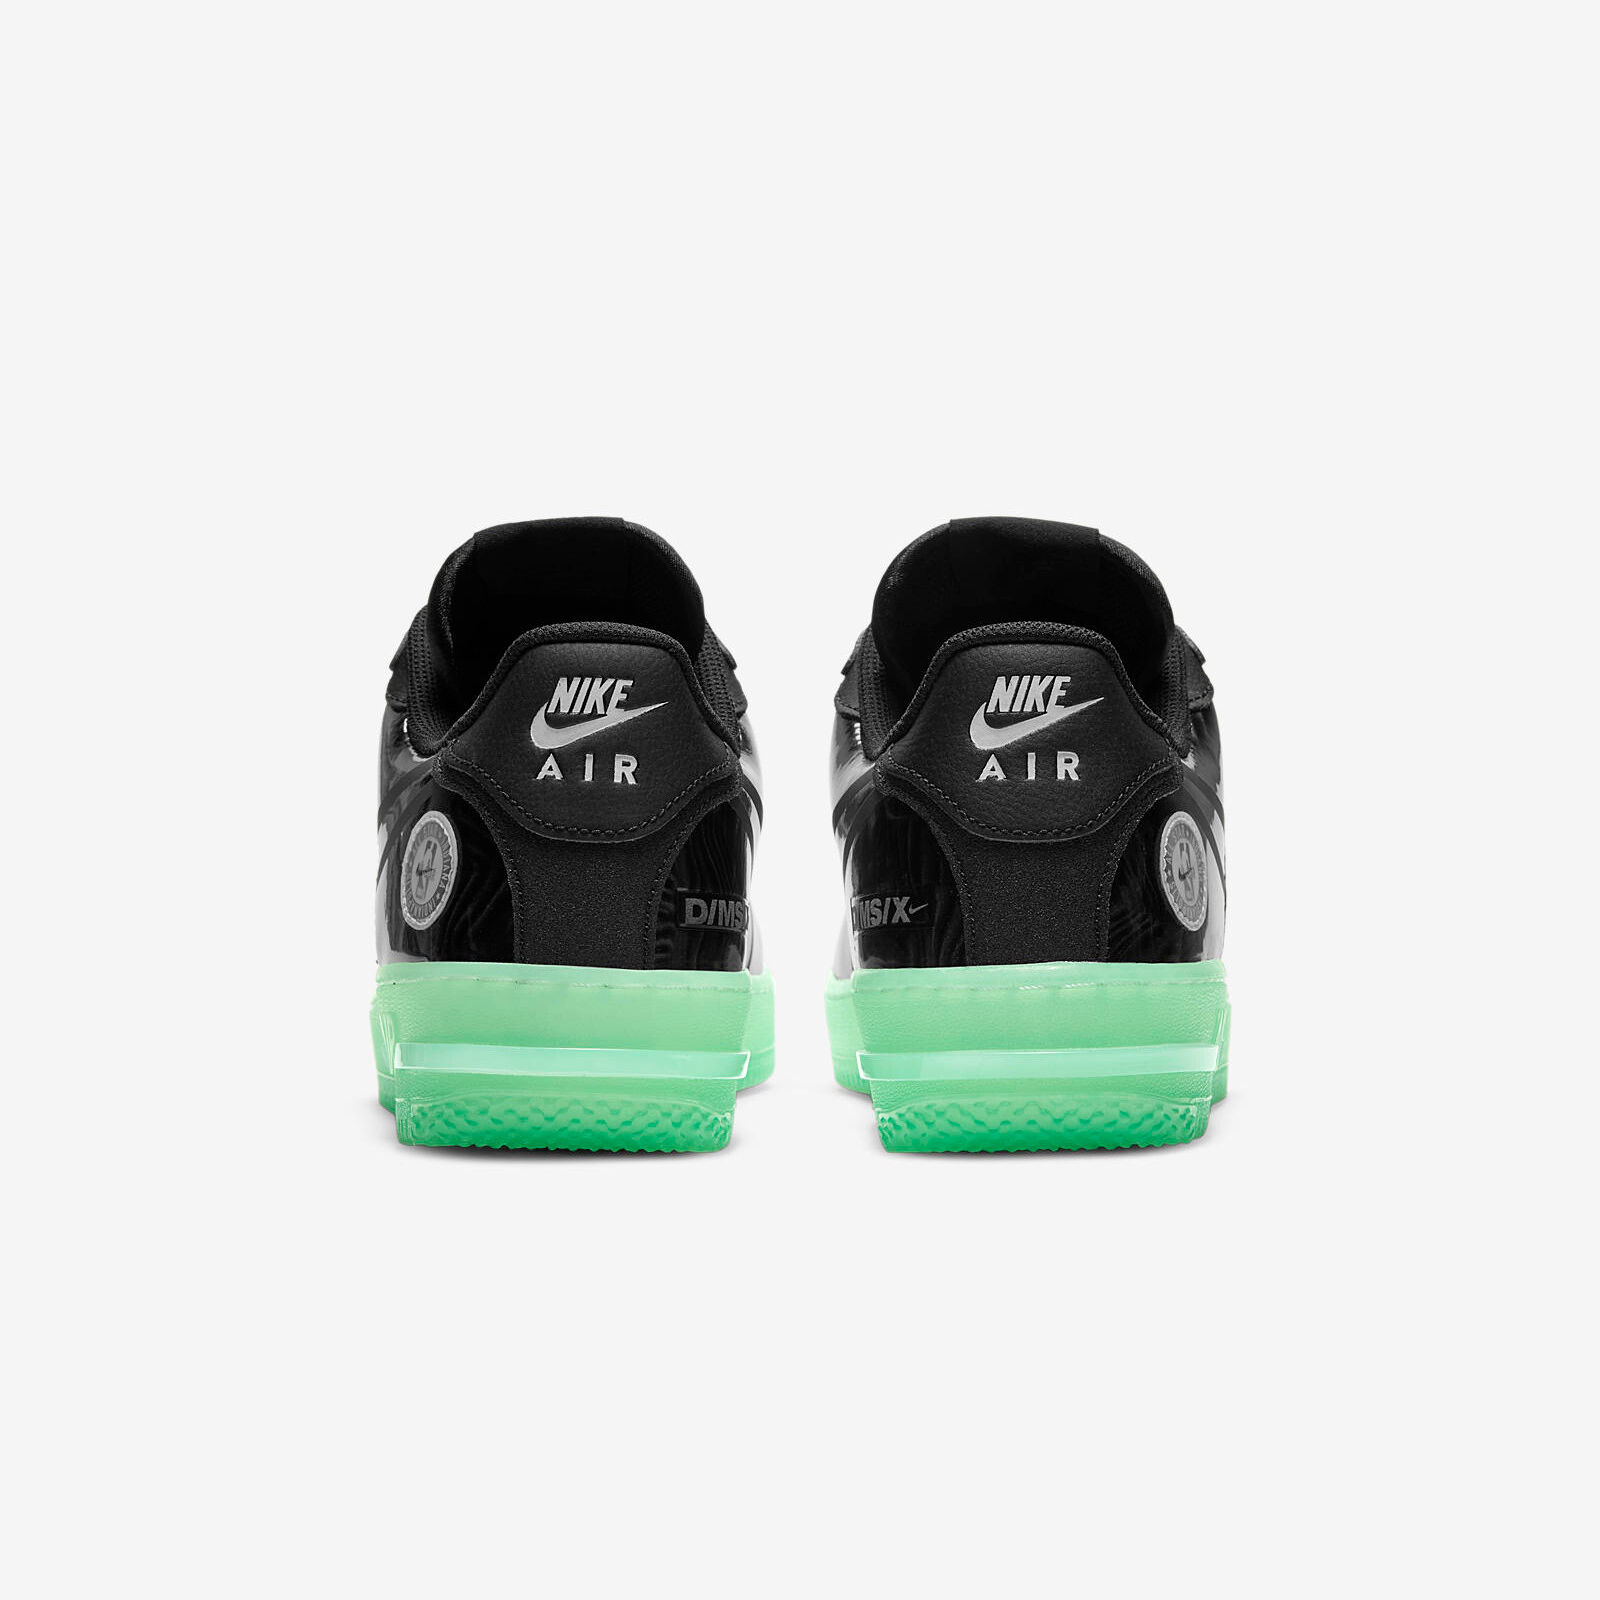 Nike Air Force 1 React LV8
Black / Barely Green